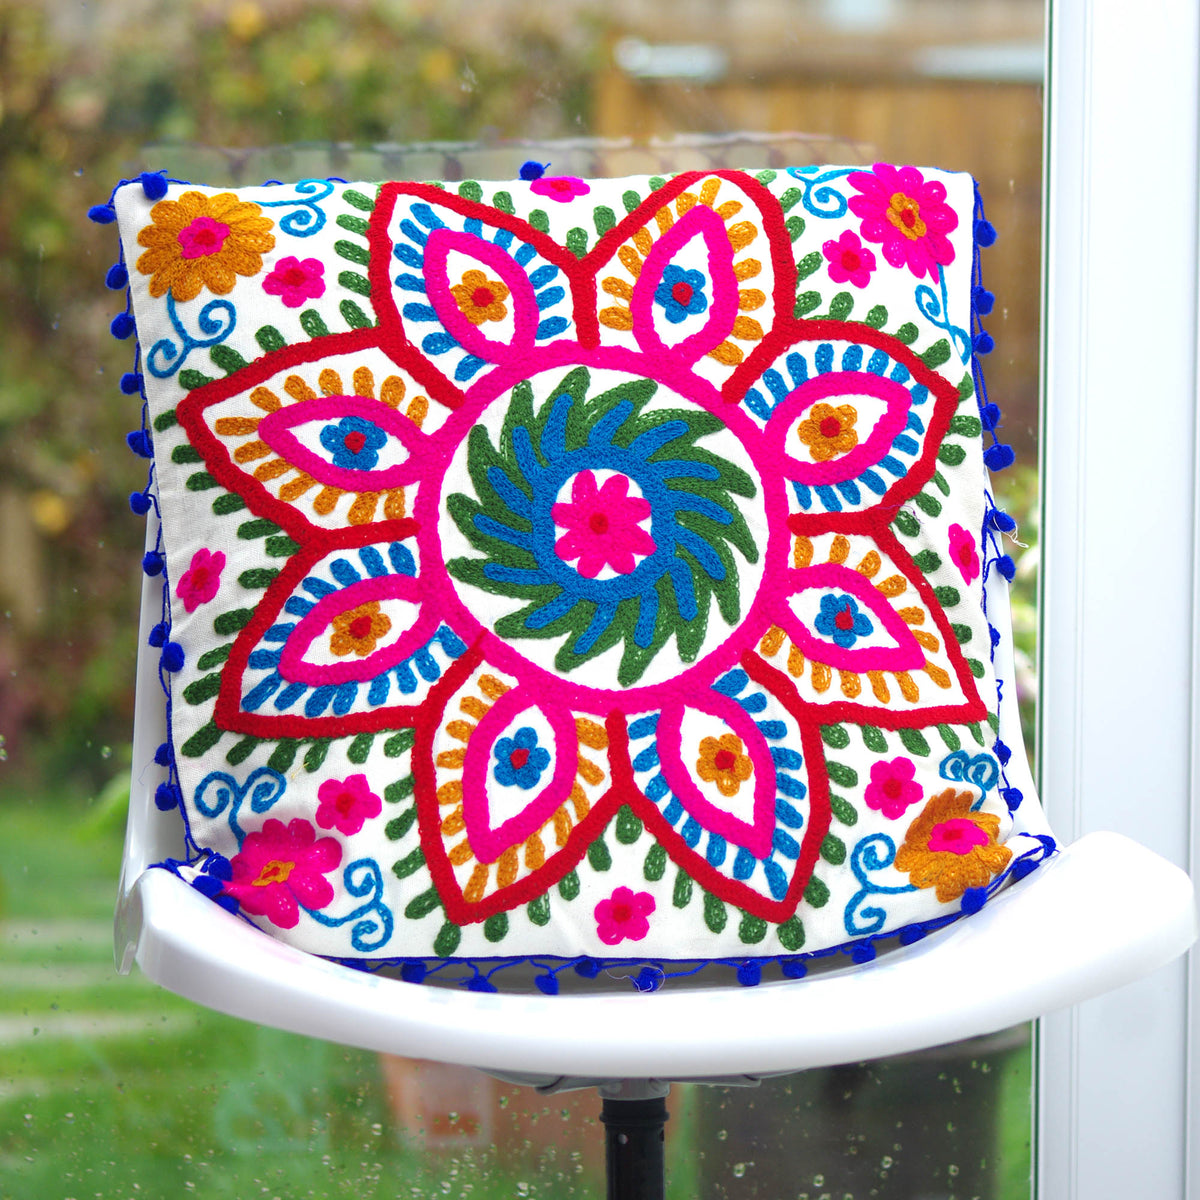 Decorative White Suzani Floral Print & Woolen Embroidered Cotton Cushion Cover With Pom Pom